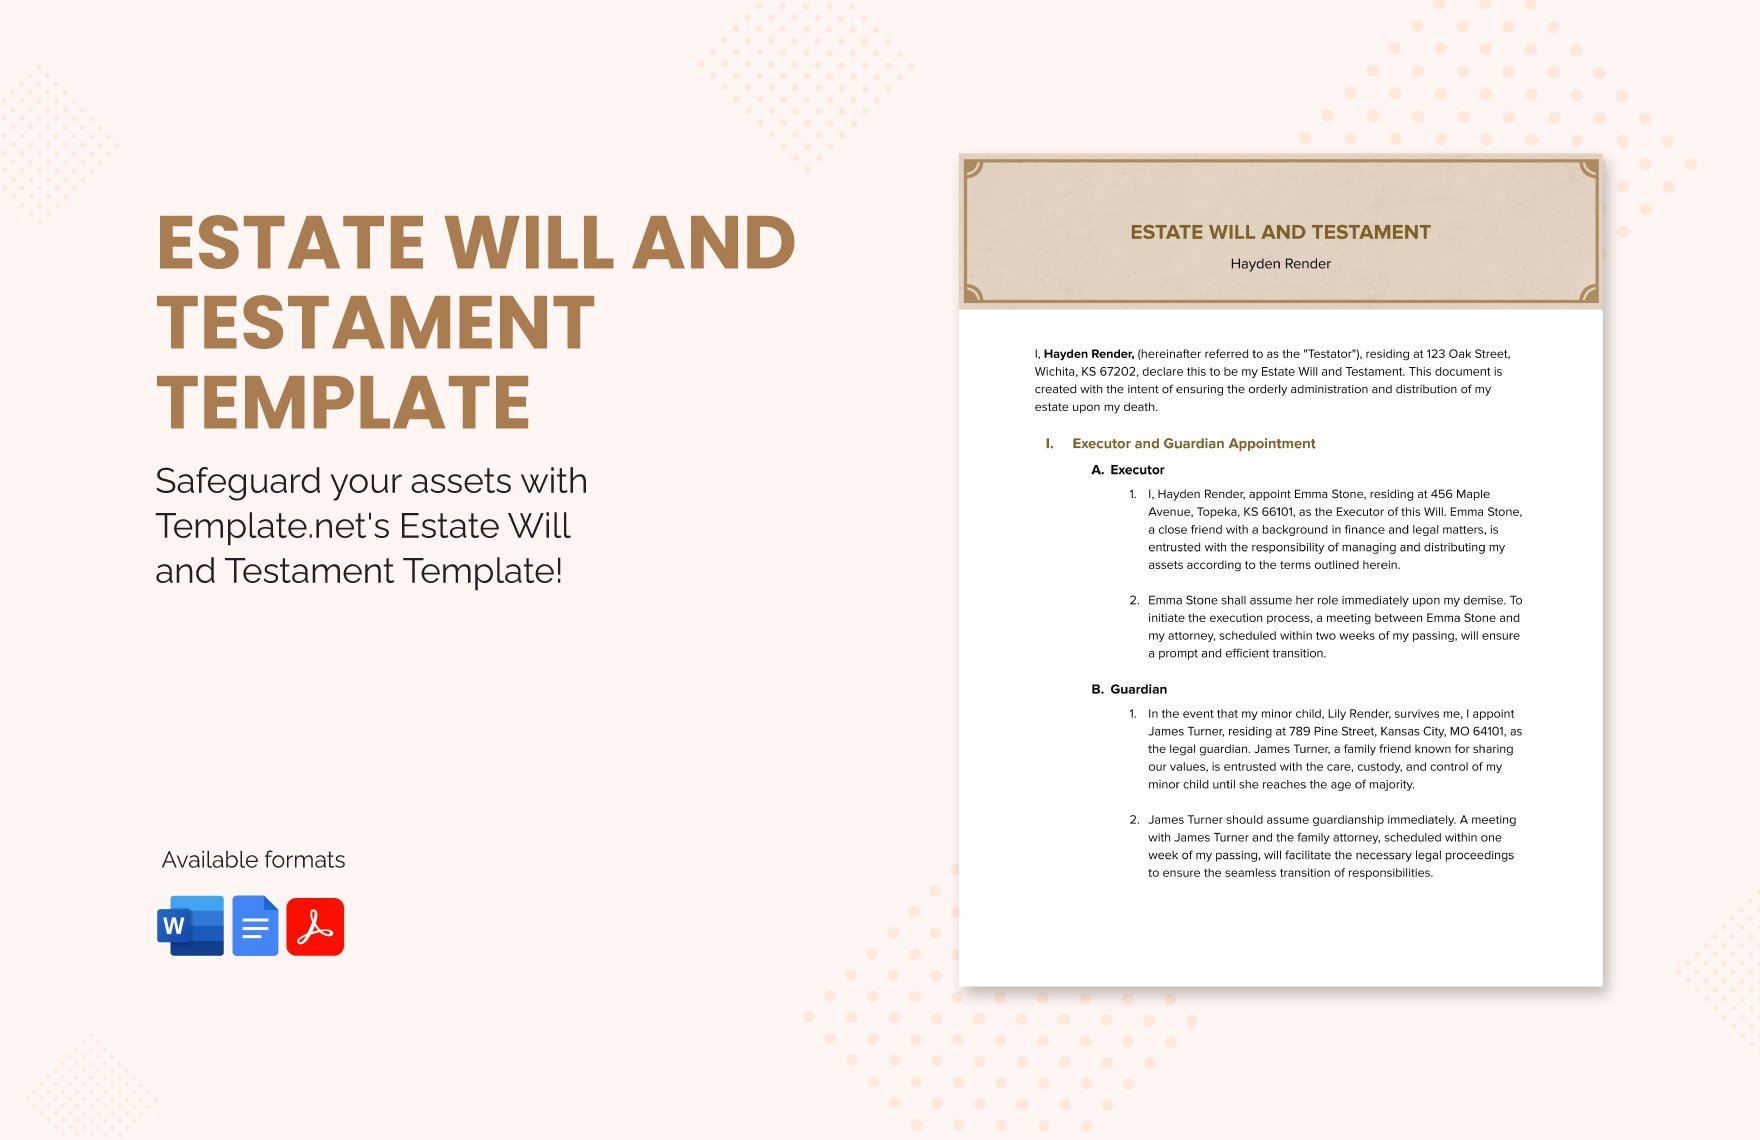 Estate Will and Testament Template